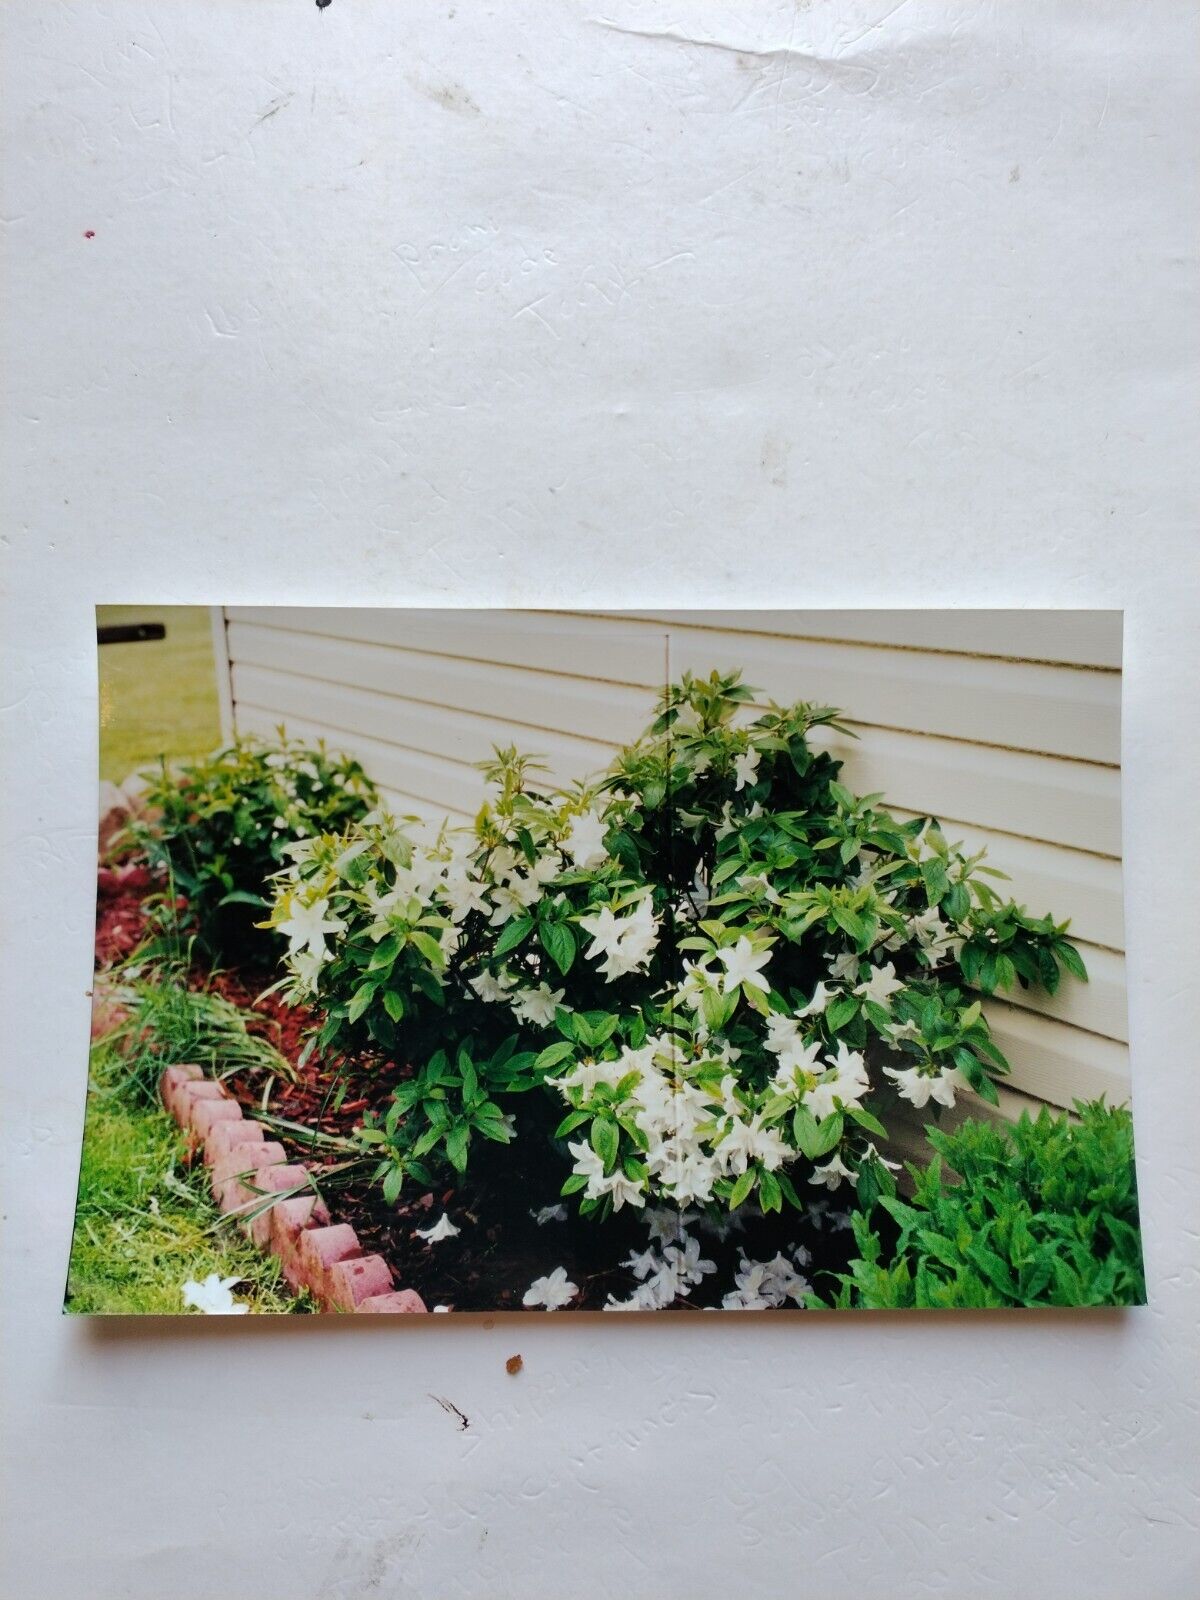 Vtg Found Color Original Photo Snapshot White Flowers On Side Of House Bed 307